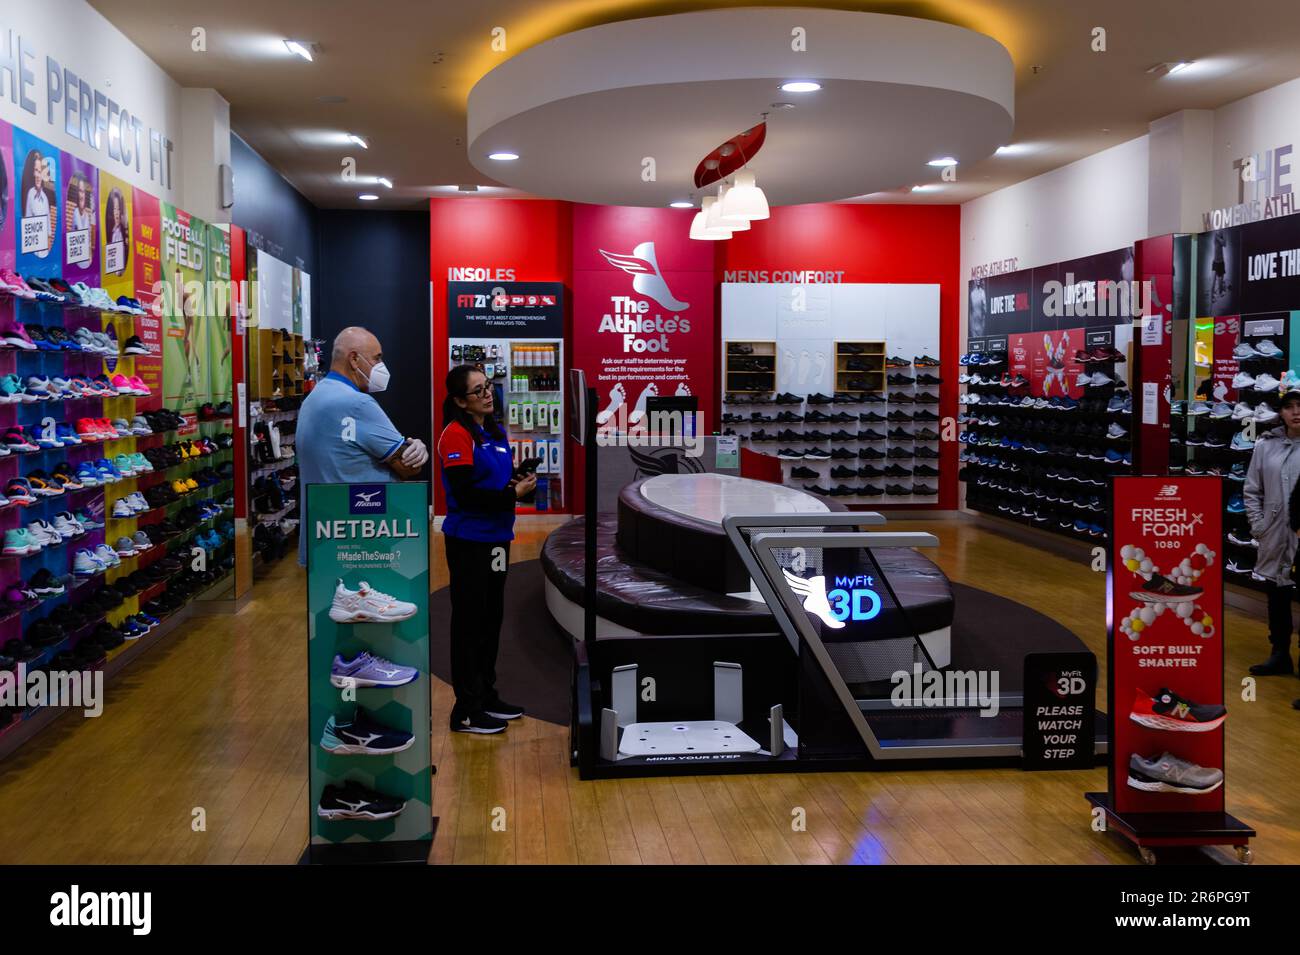 MELBOURNE, AUSTRALIA - APRIL 29: A man in a facemask speaks to a shop assistant in the Greensborough Plaza during COVID 19 on 29 April, 2020 in Melbourne, Australia. Stock Photo